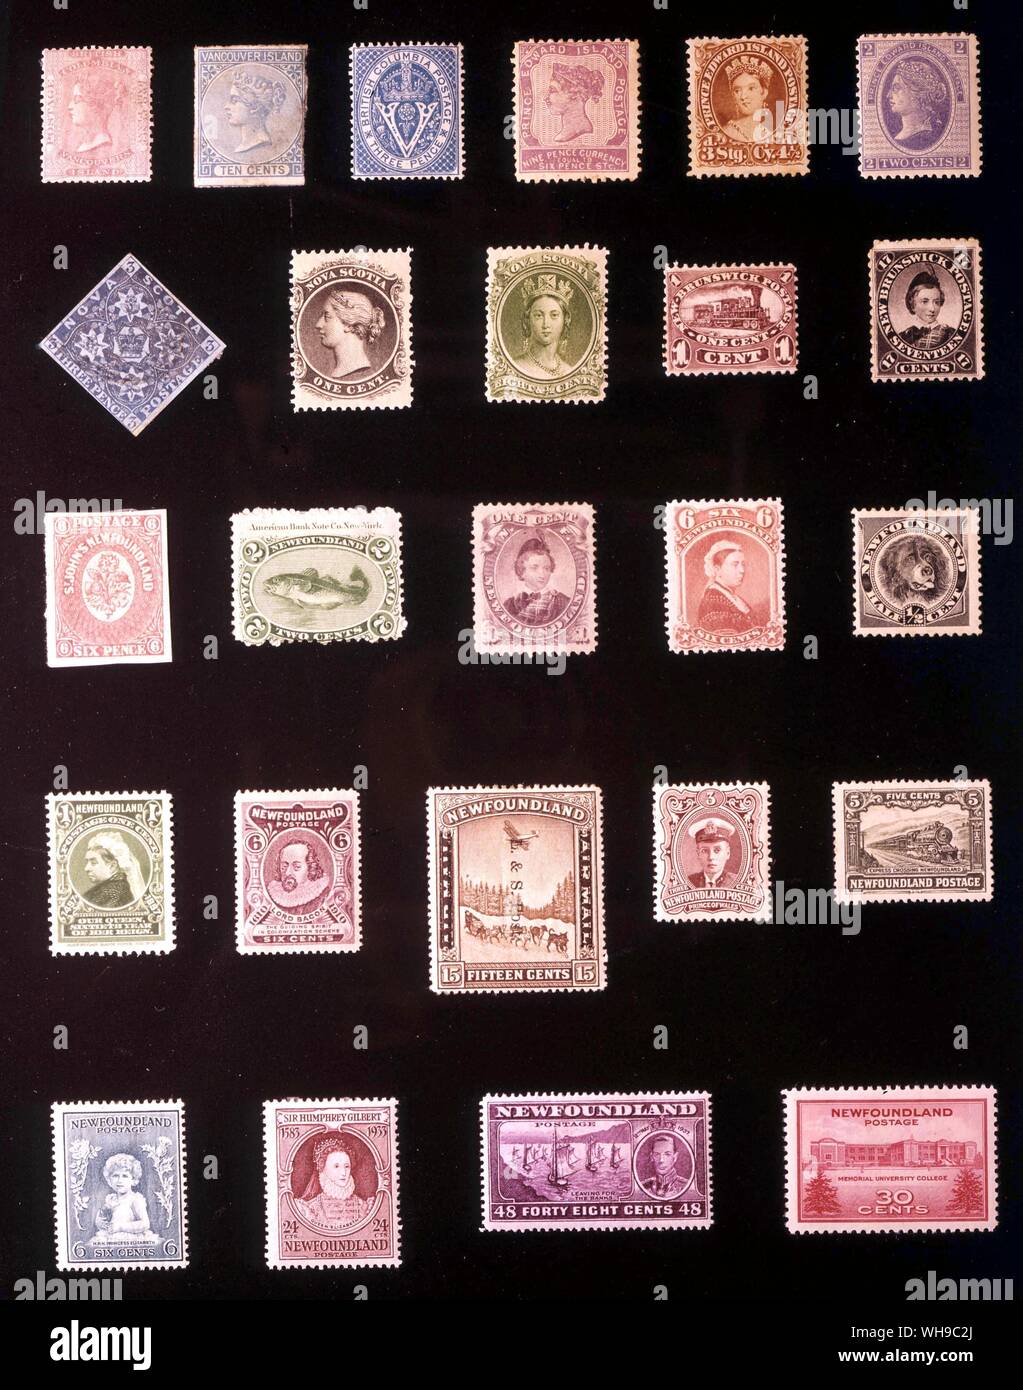 AMERICA - CANADIAN PROVINCES: (left to right) 1. British Columbia and Vancouver's Island, 2.5 pence, 1860, 2. Vancouver Island, 10 cents, 1865, 3. British Columbia, 3 pence, 1865, 4. Prince Edward Island, 9 pence, 1862, 5. Prince Edward Island, 3 pence, 1870, 6. Prince Edward Island, 2 cents, 1872, 7. Nova Scotia, 3 pence, 1851, 8. Nova Scotia, 1 cent, 1860, 9. Nova Scotia, 8.5 cents, 1860, 10. New Brunswick, 1 cent, 1860, 11. New Brunswick, 17 cents, 1860, 12. Newfoundland, 6 pence, 1857, 13. Newfoundland, 2 cents, 1866, 14. Newfoundland, 1 cent, 1871, 15. Newfoundland, 6 cents, 1870, 16. Stock Photo